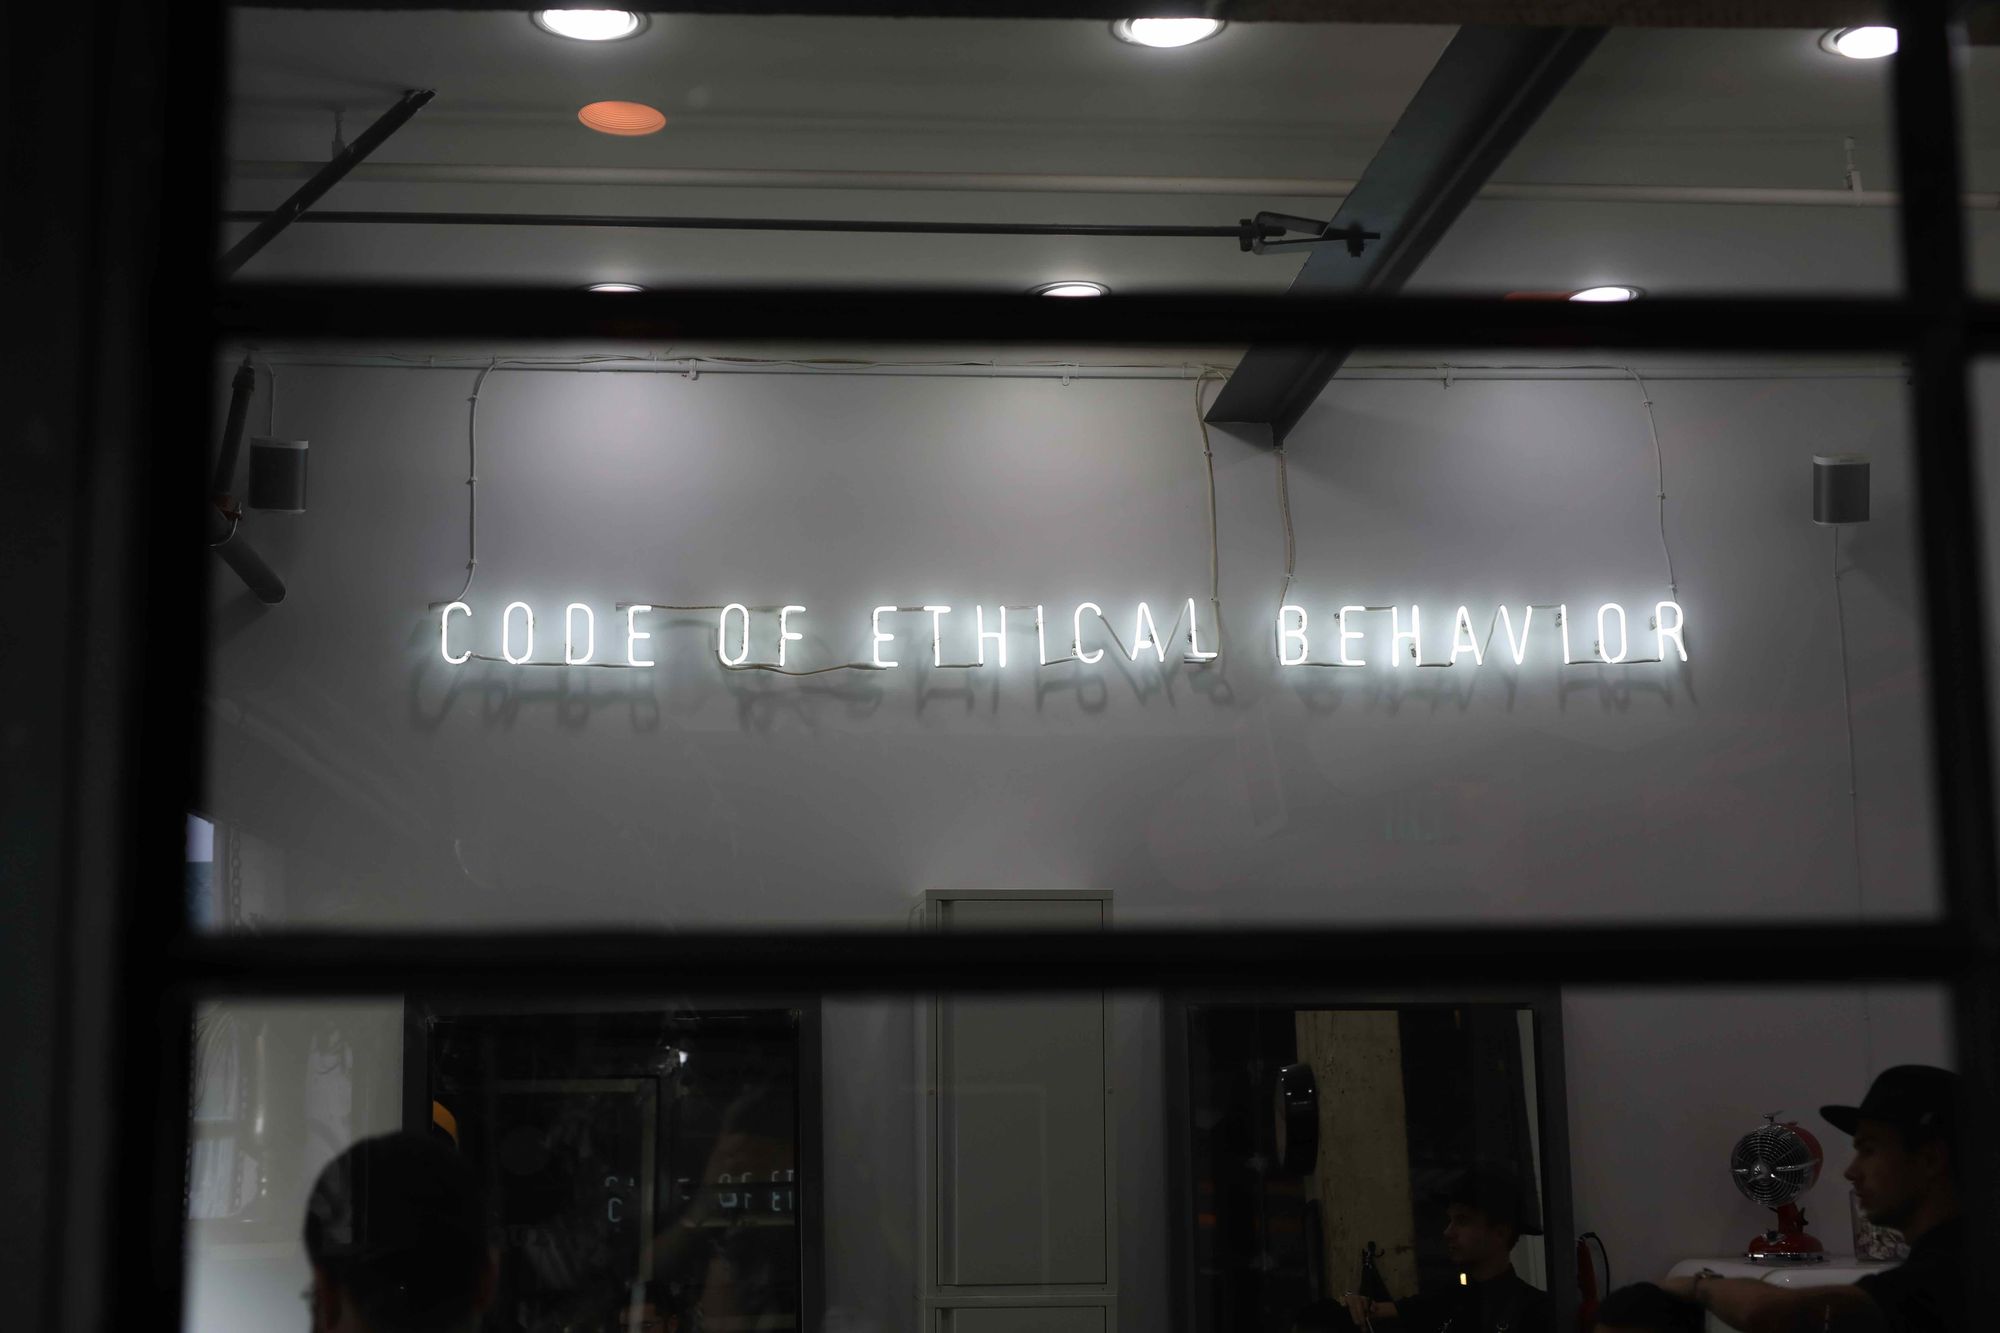 Designing a strong moral and ethical practice